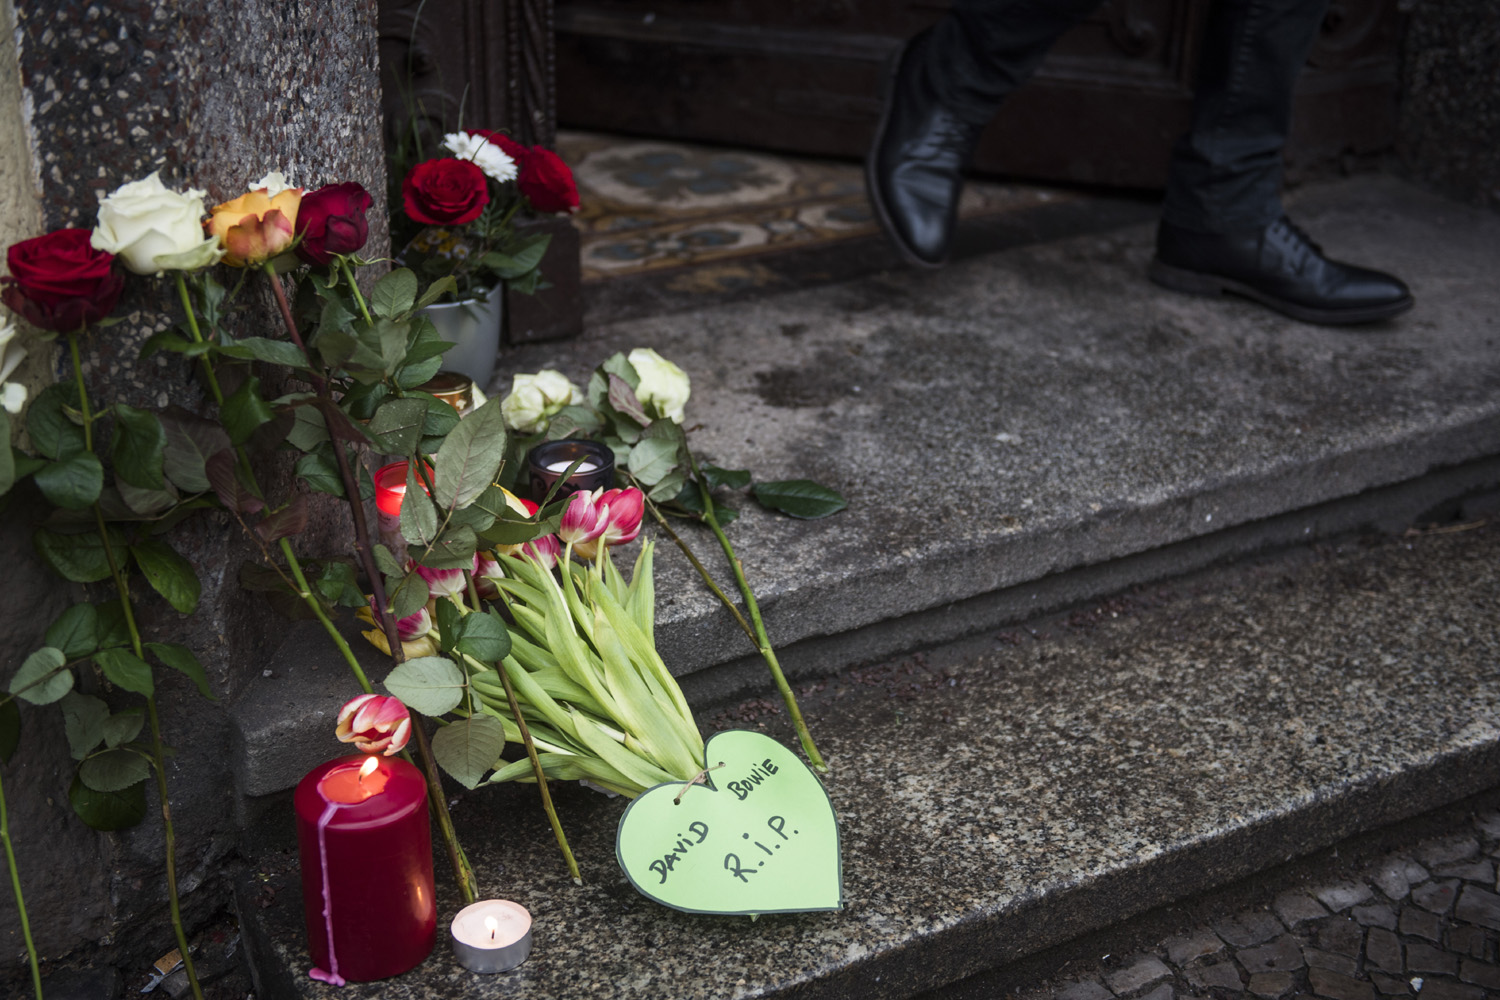 A resident leaves the building among tributes to British rock legend David Bowie leftoutside his former home in Berlin's Hauptstrasse 155 on January 11, 2016. British rock music legend David Bowie has died after a long battle with cancer, his official Twitter and Facebook accounts said. / AFP / ODD ANDERSEN